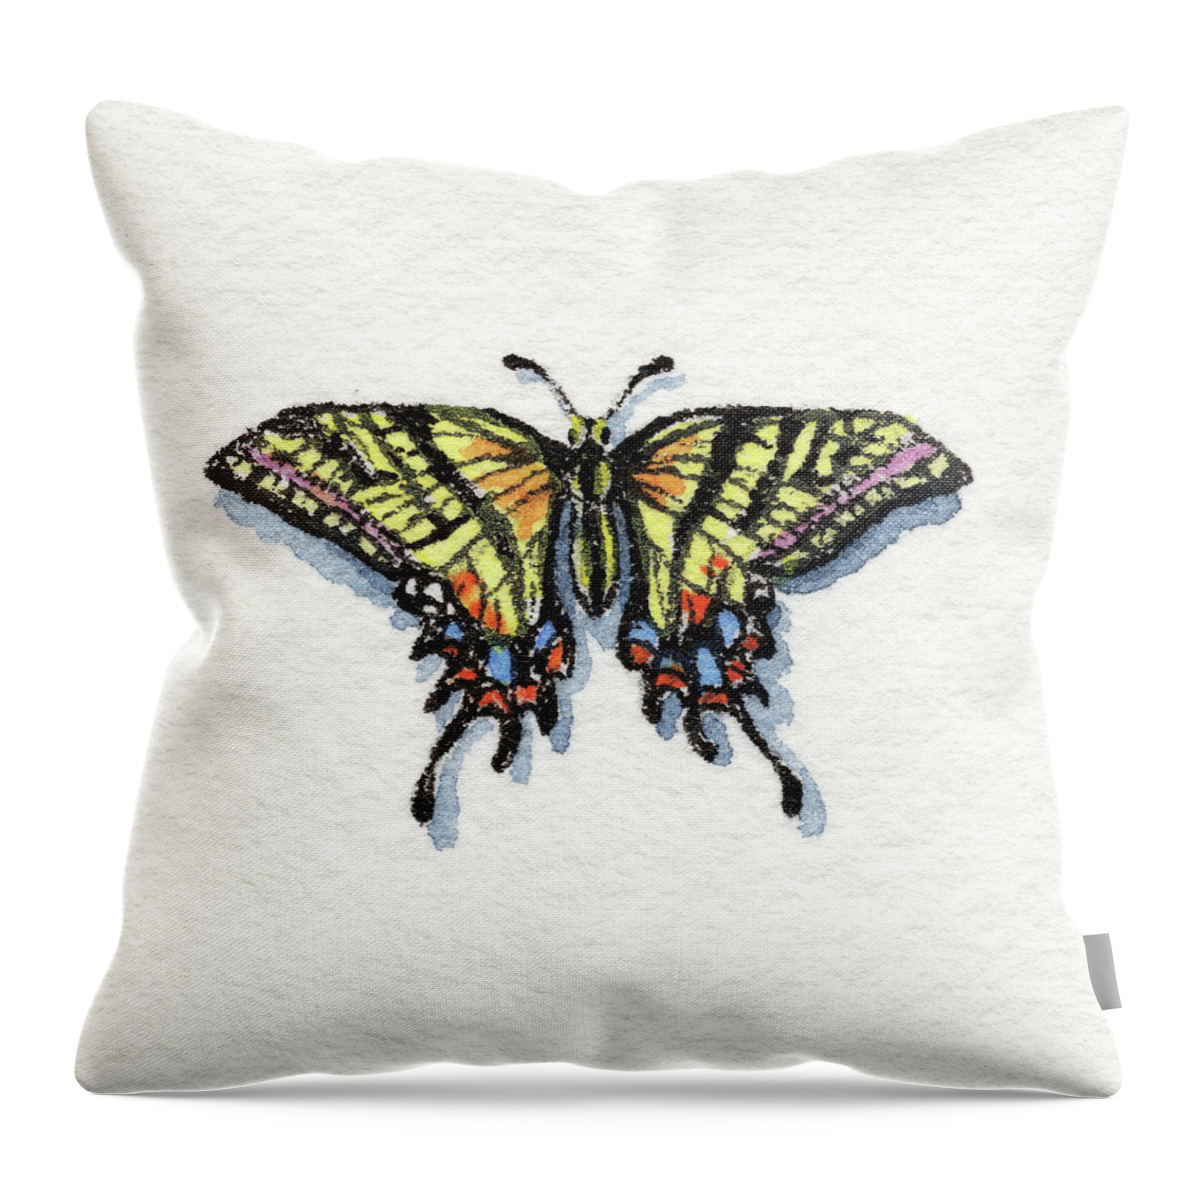 Two Tailed Throw Pillow featuring the painting Two Tailed Swallowtail Papilio Multicaudata Daunus Watercolor Butterfly by Irina Sztukowski